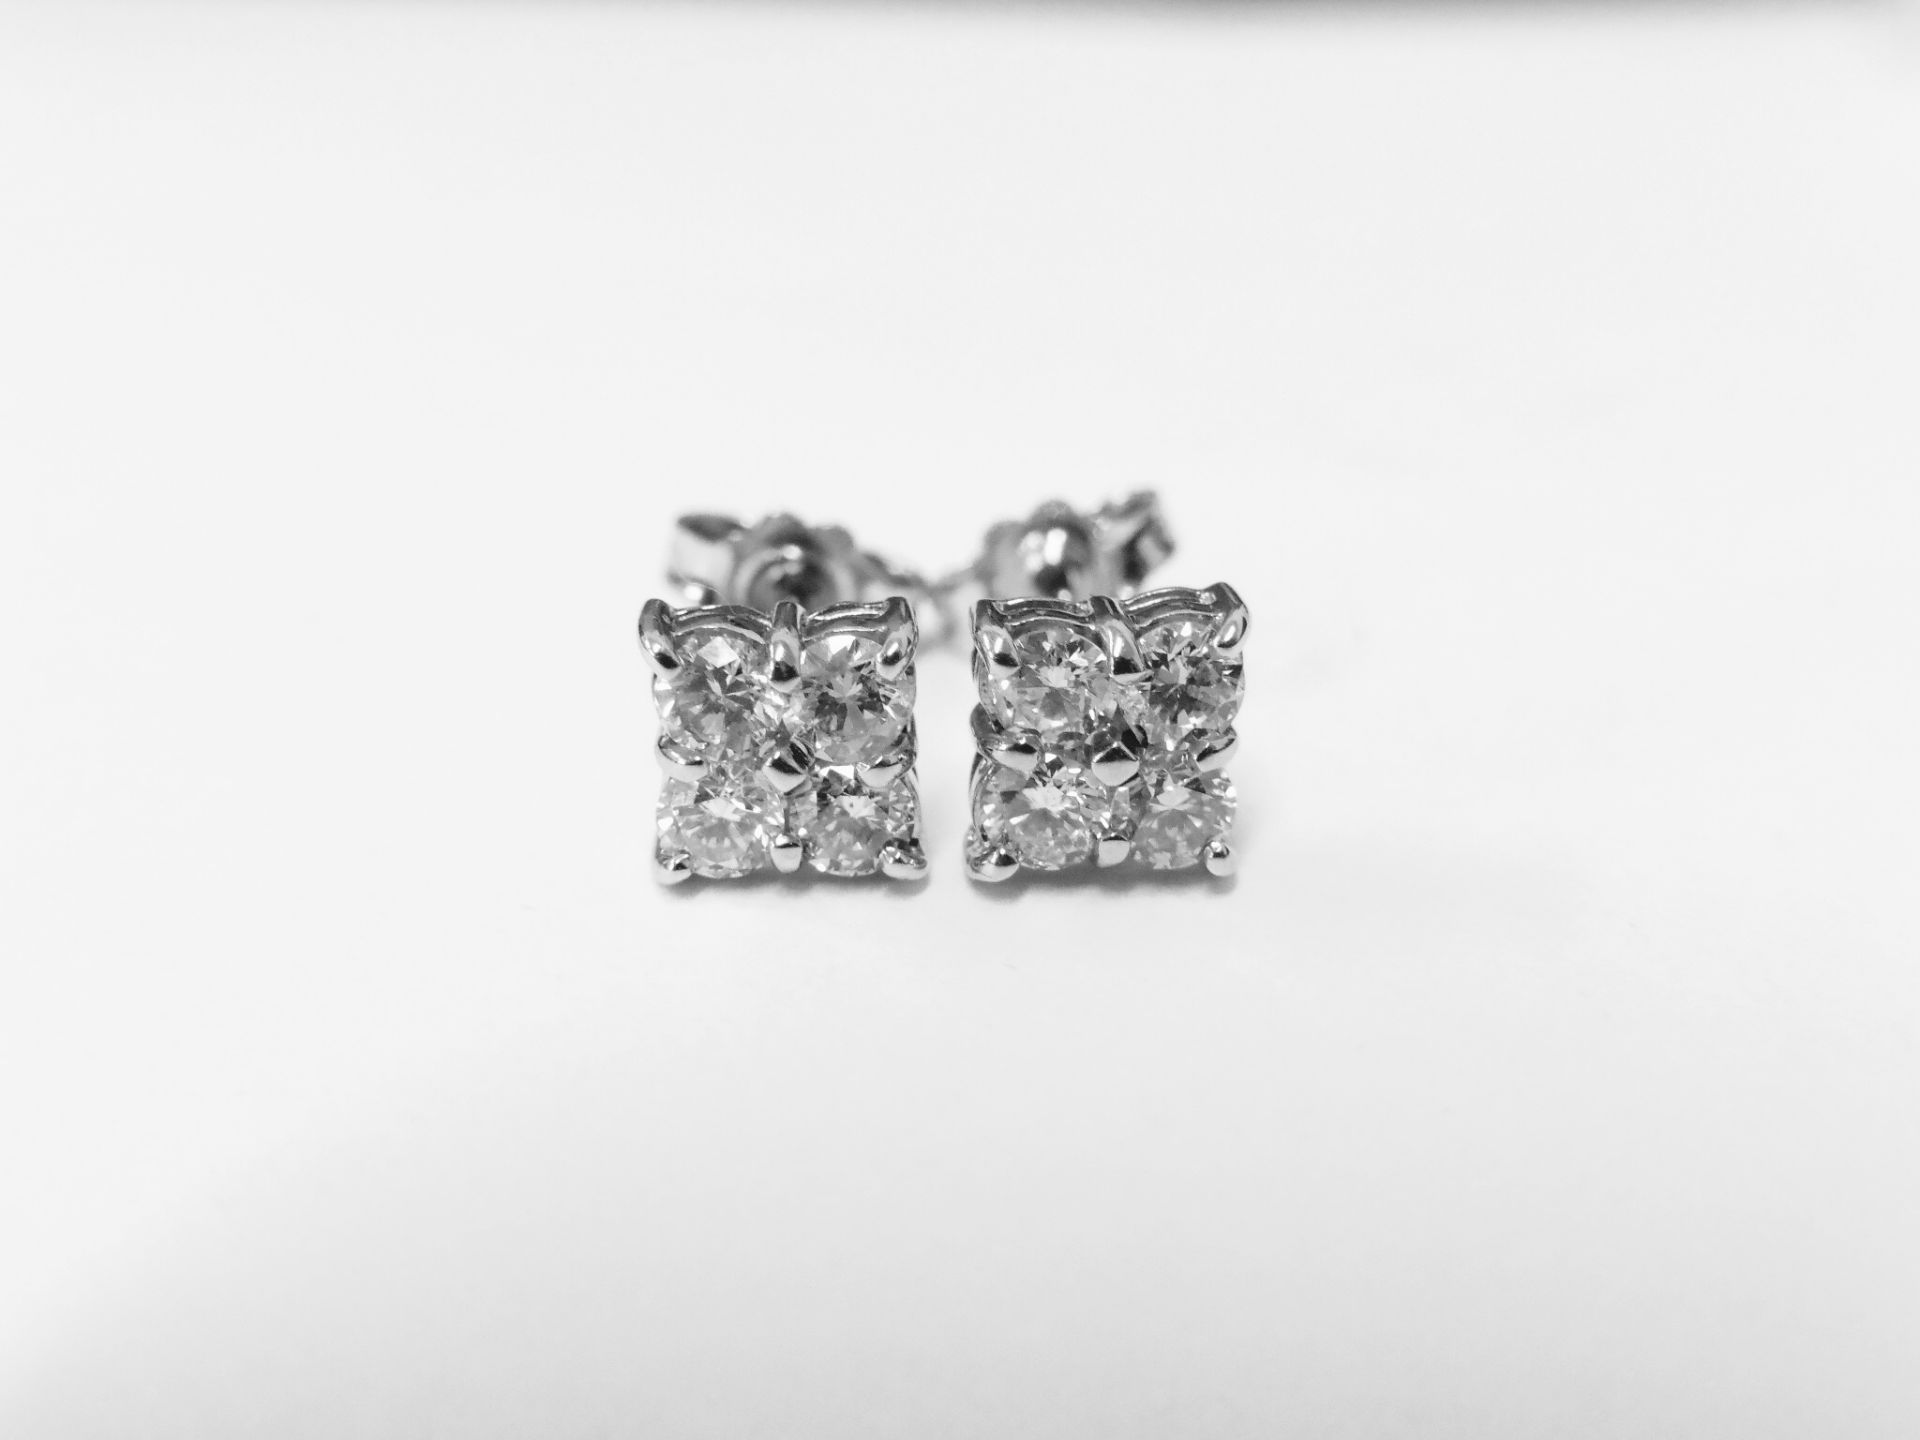 18ct diamond earrings,0.80ct in 8 stone 0.10ct each i si2 clarity and colour 2gms 18ct white gold uk - Image 2 of 3